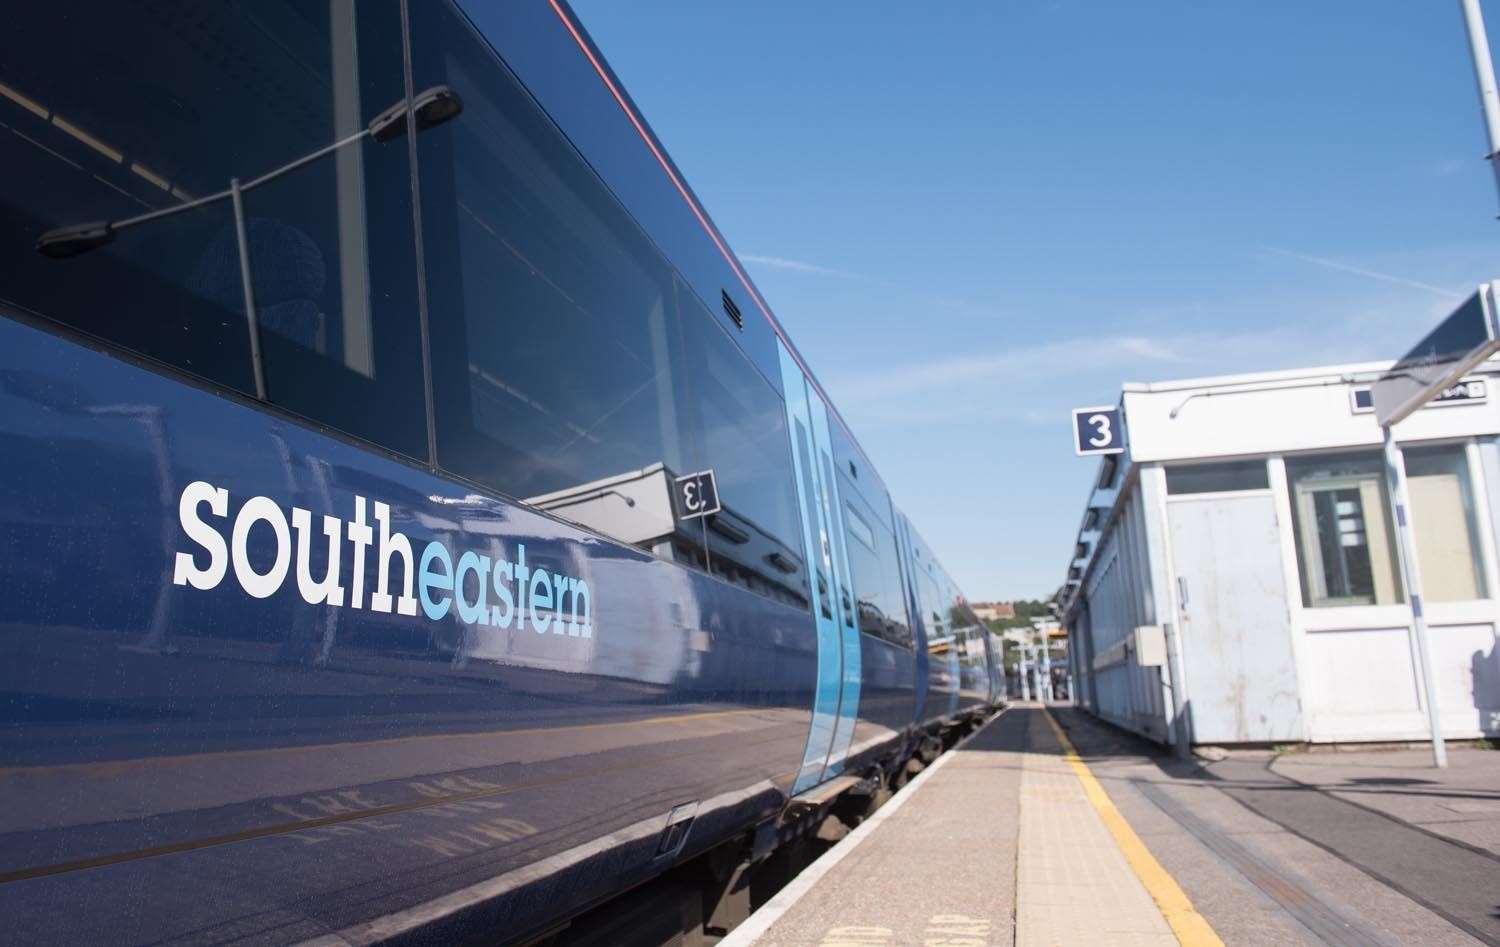 There are just two bidders left in the race to secure the South Eastern franchise